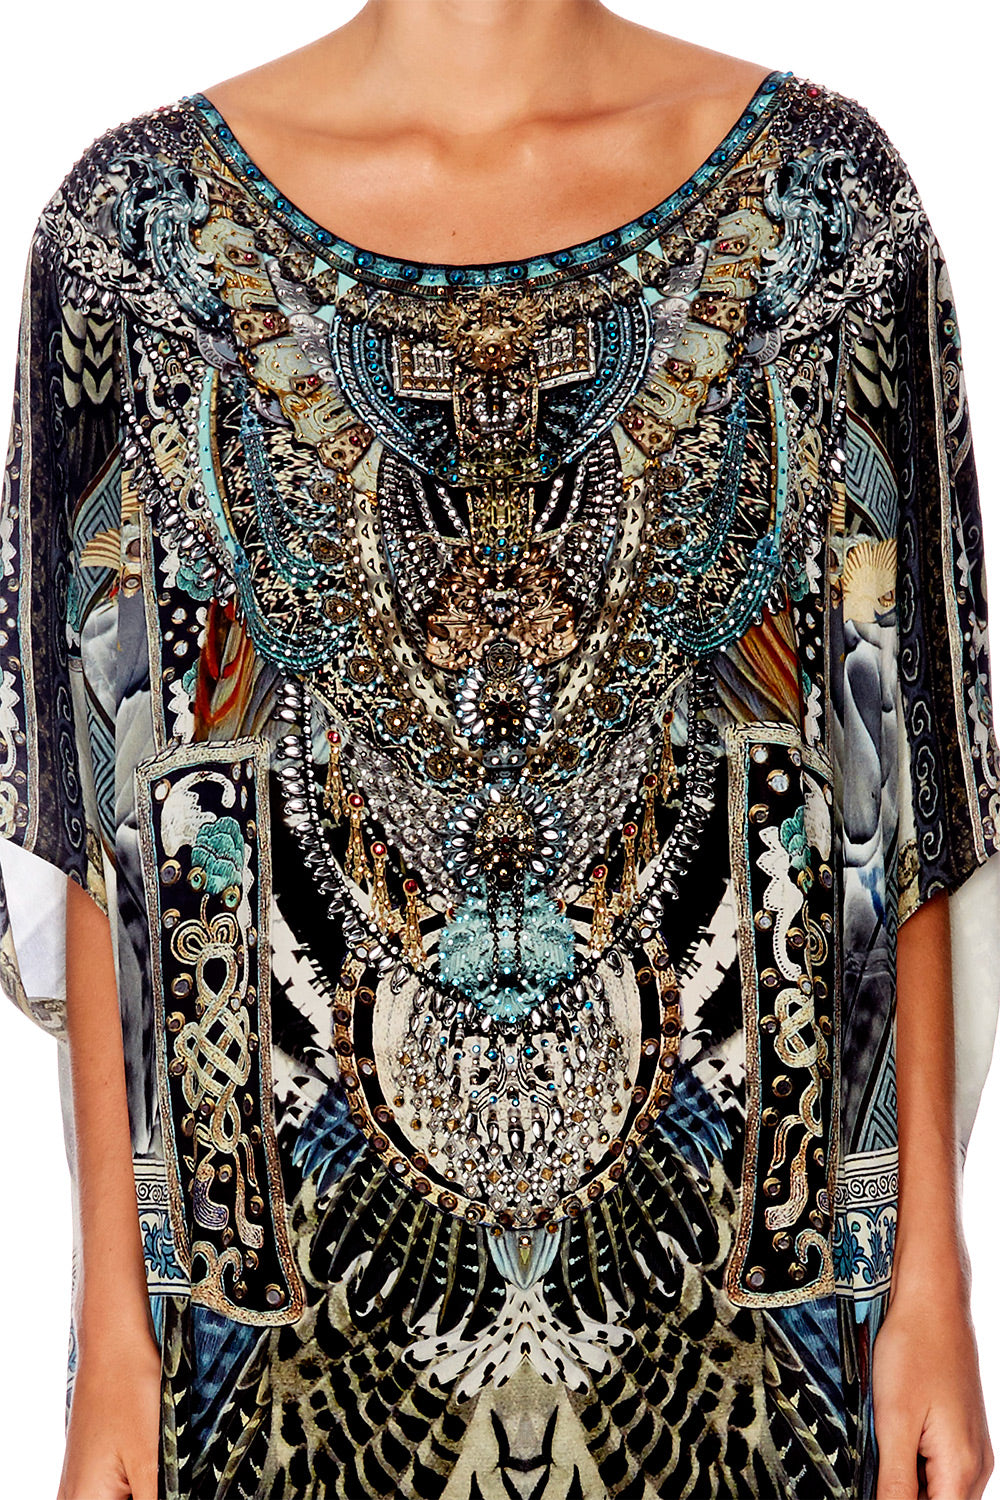 GIRL ON THE WING ROUND NECK KAFTAN